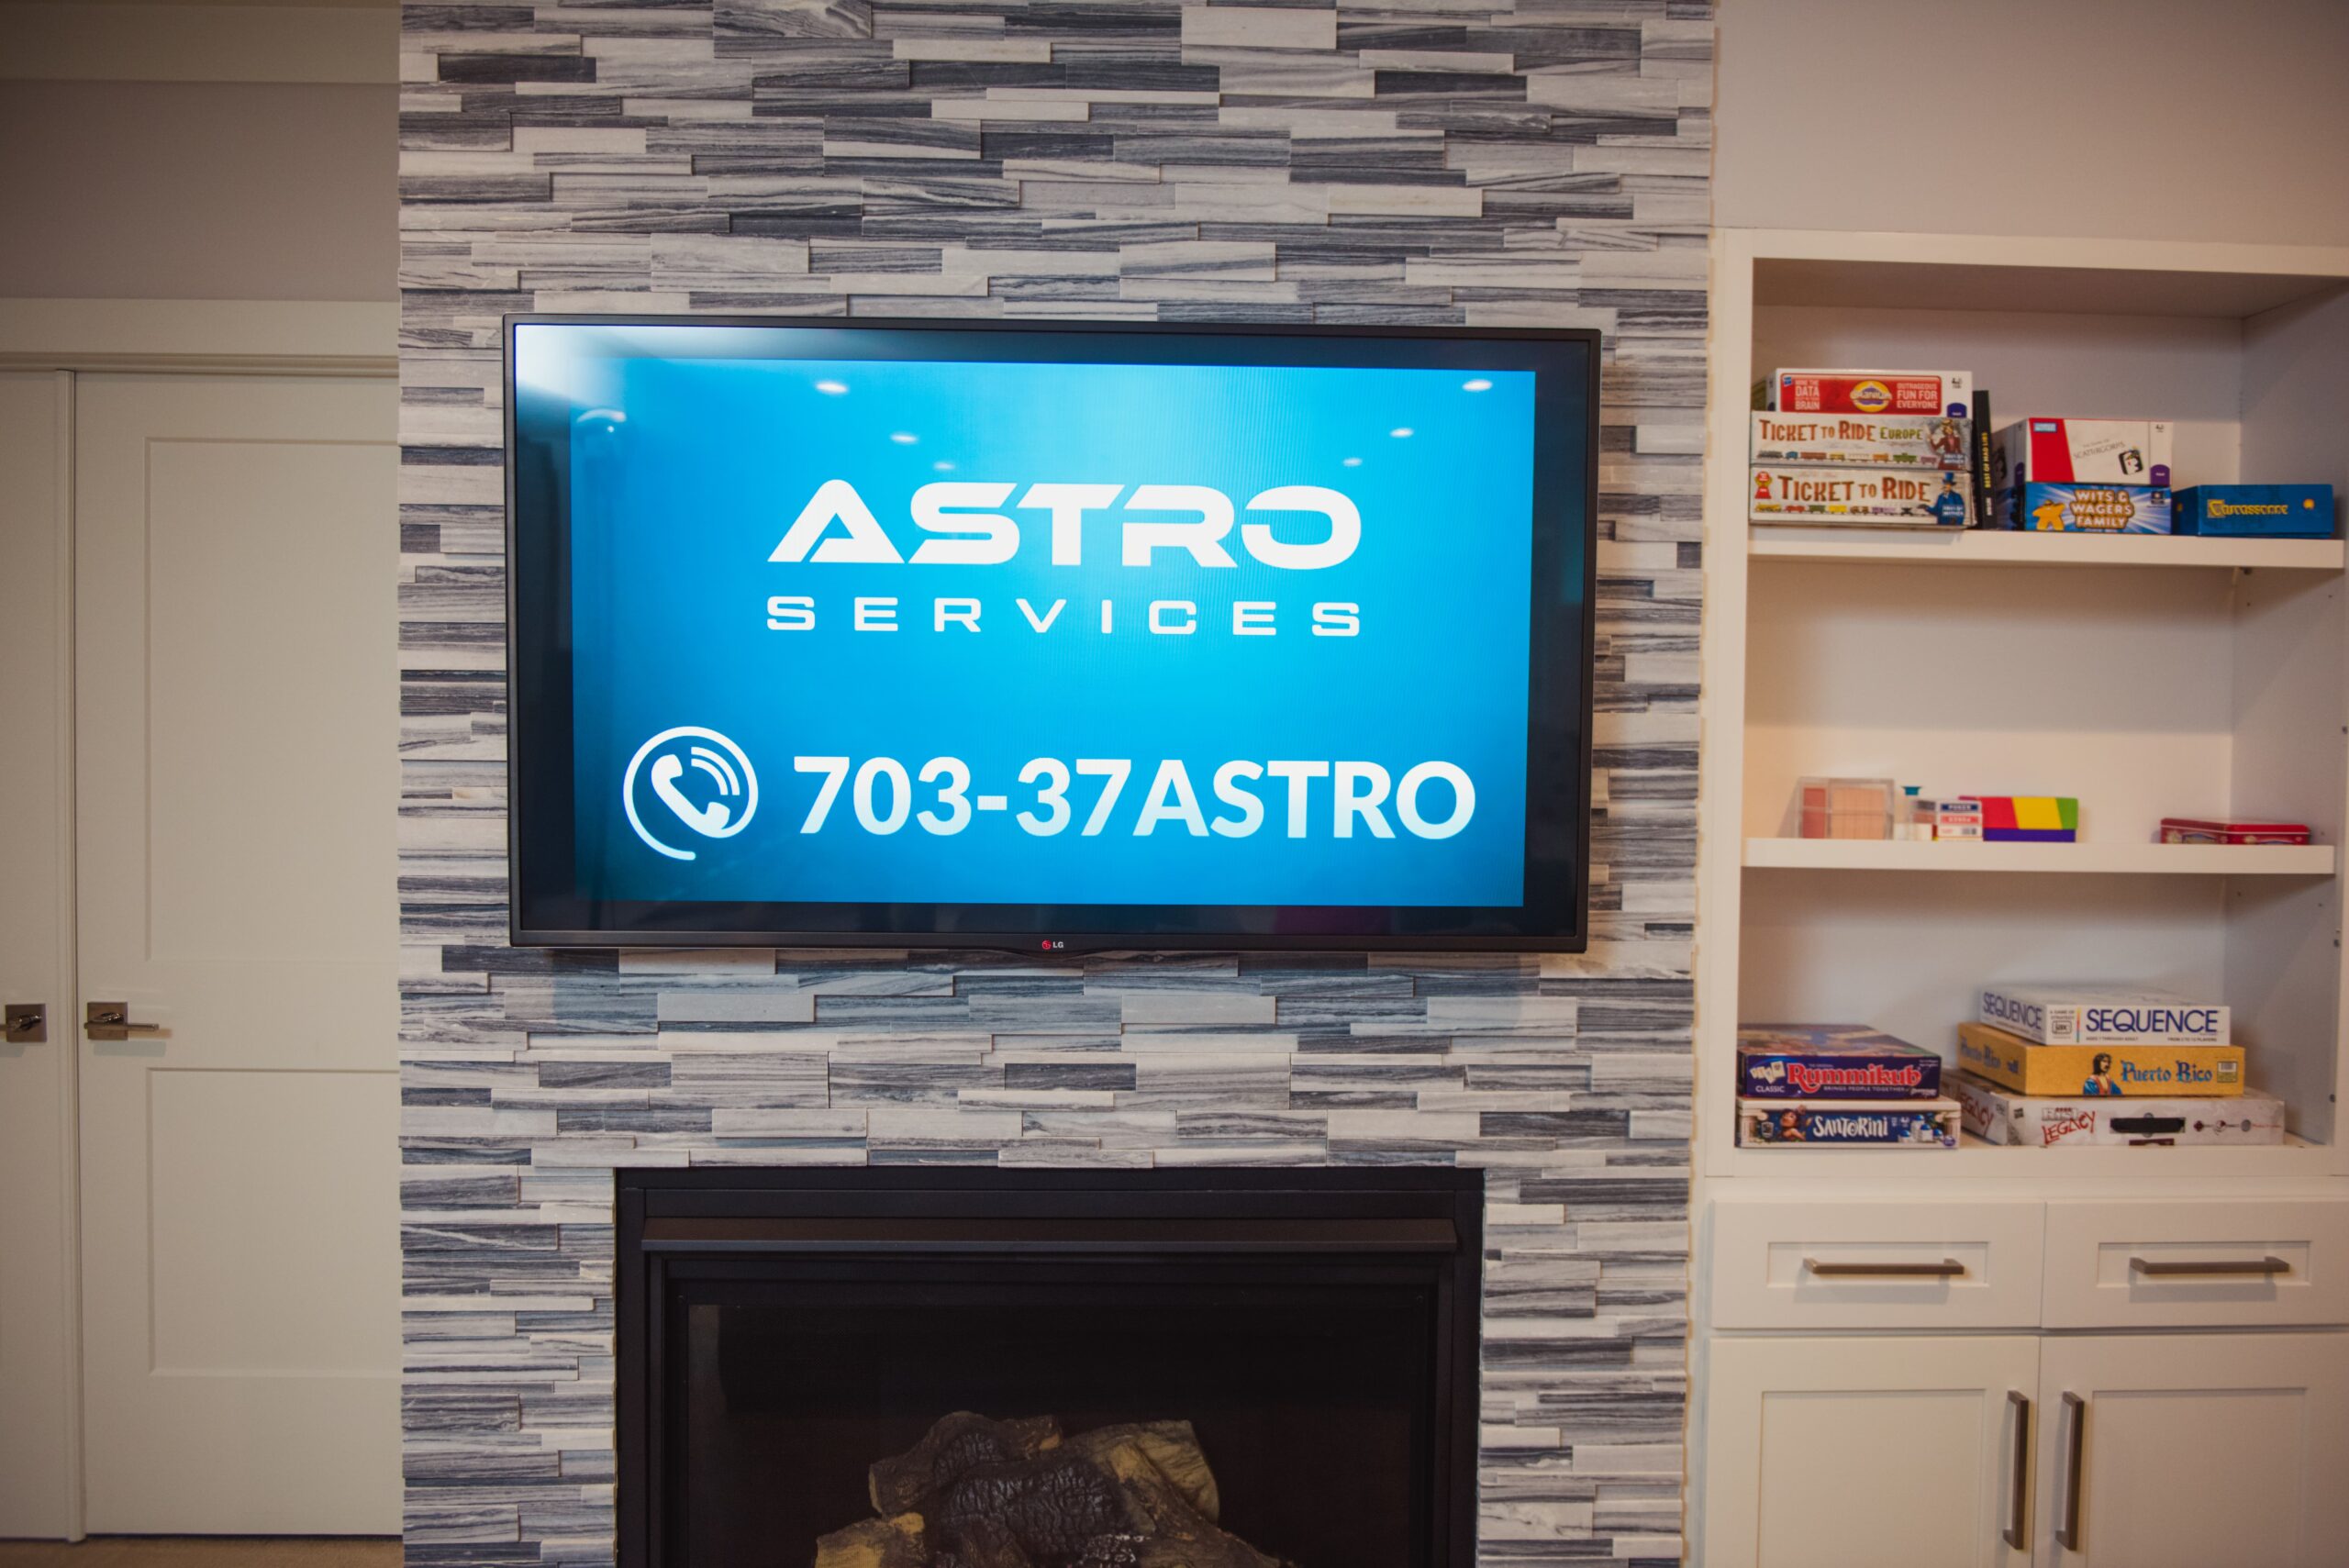 Astro Services mentioned on a tv